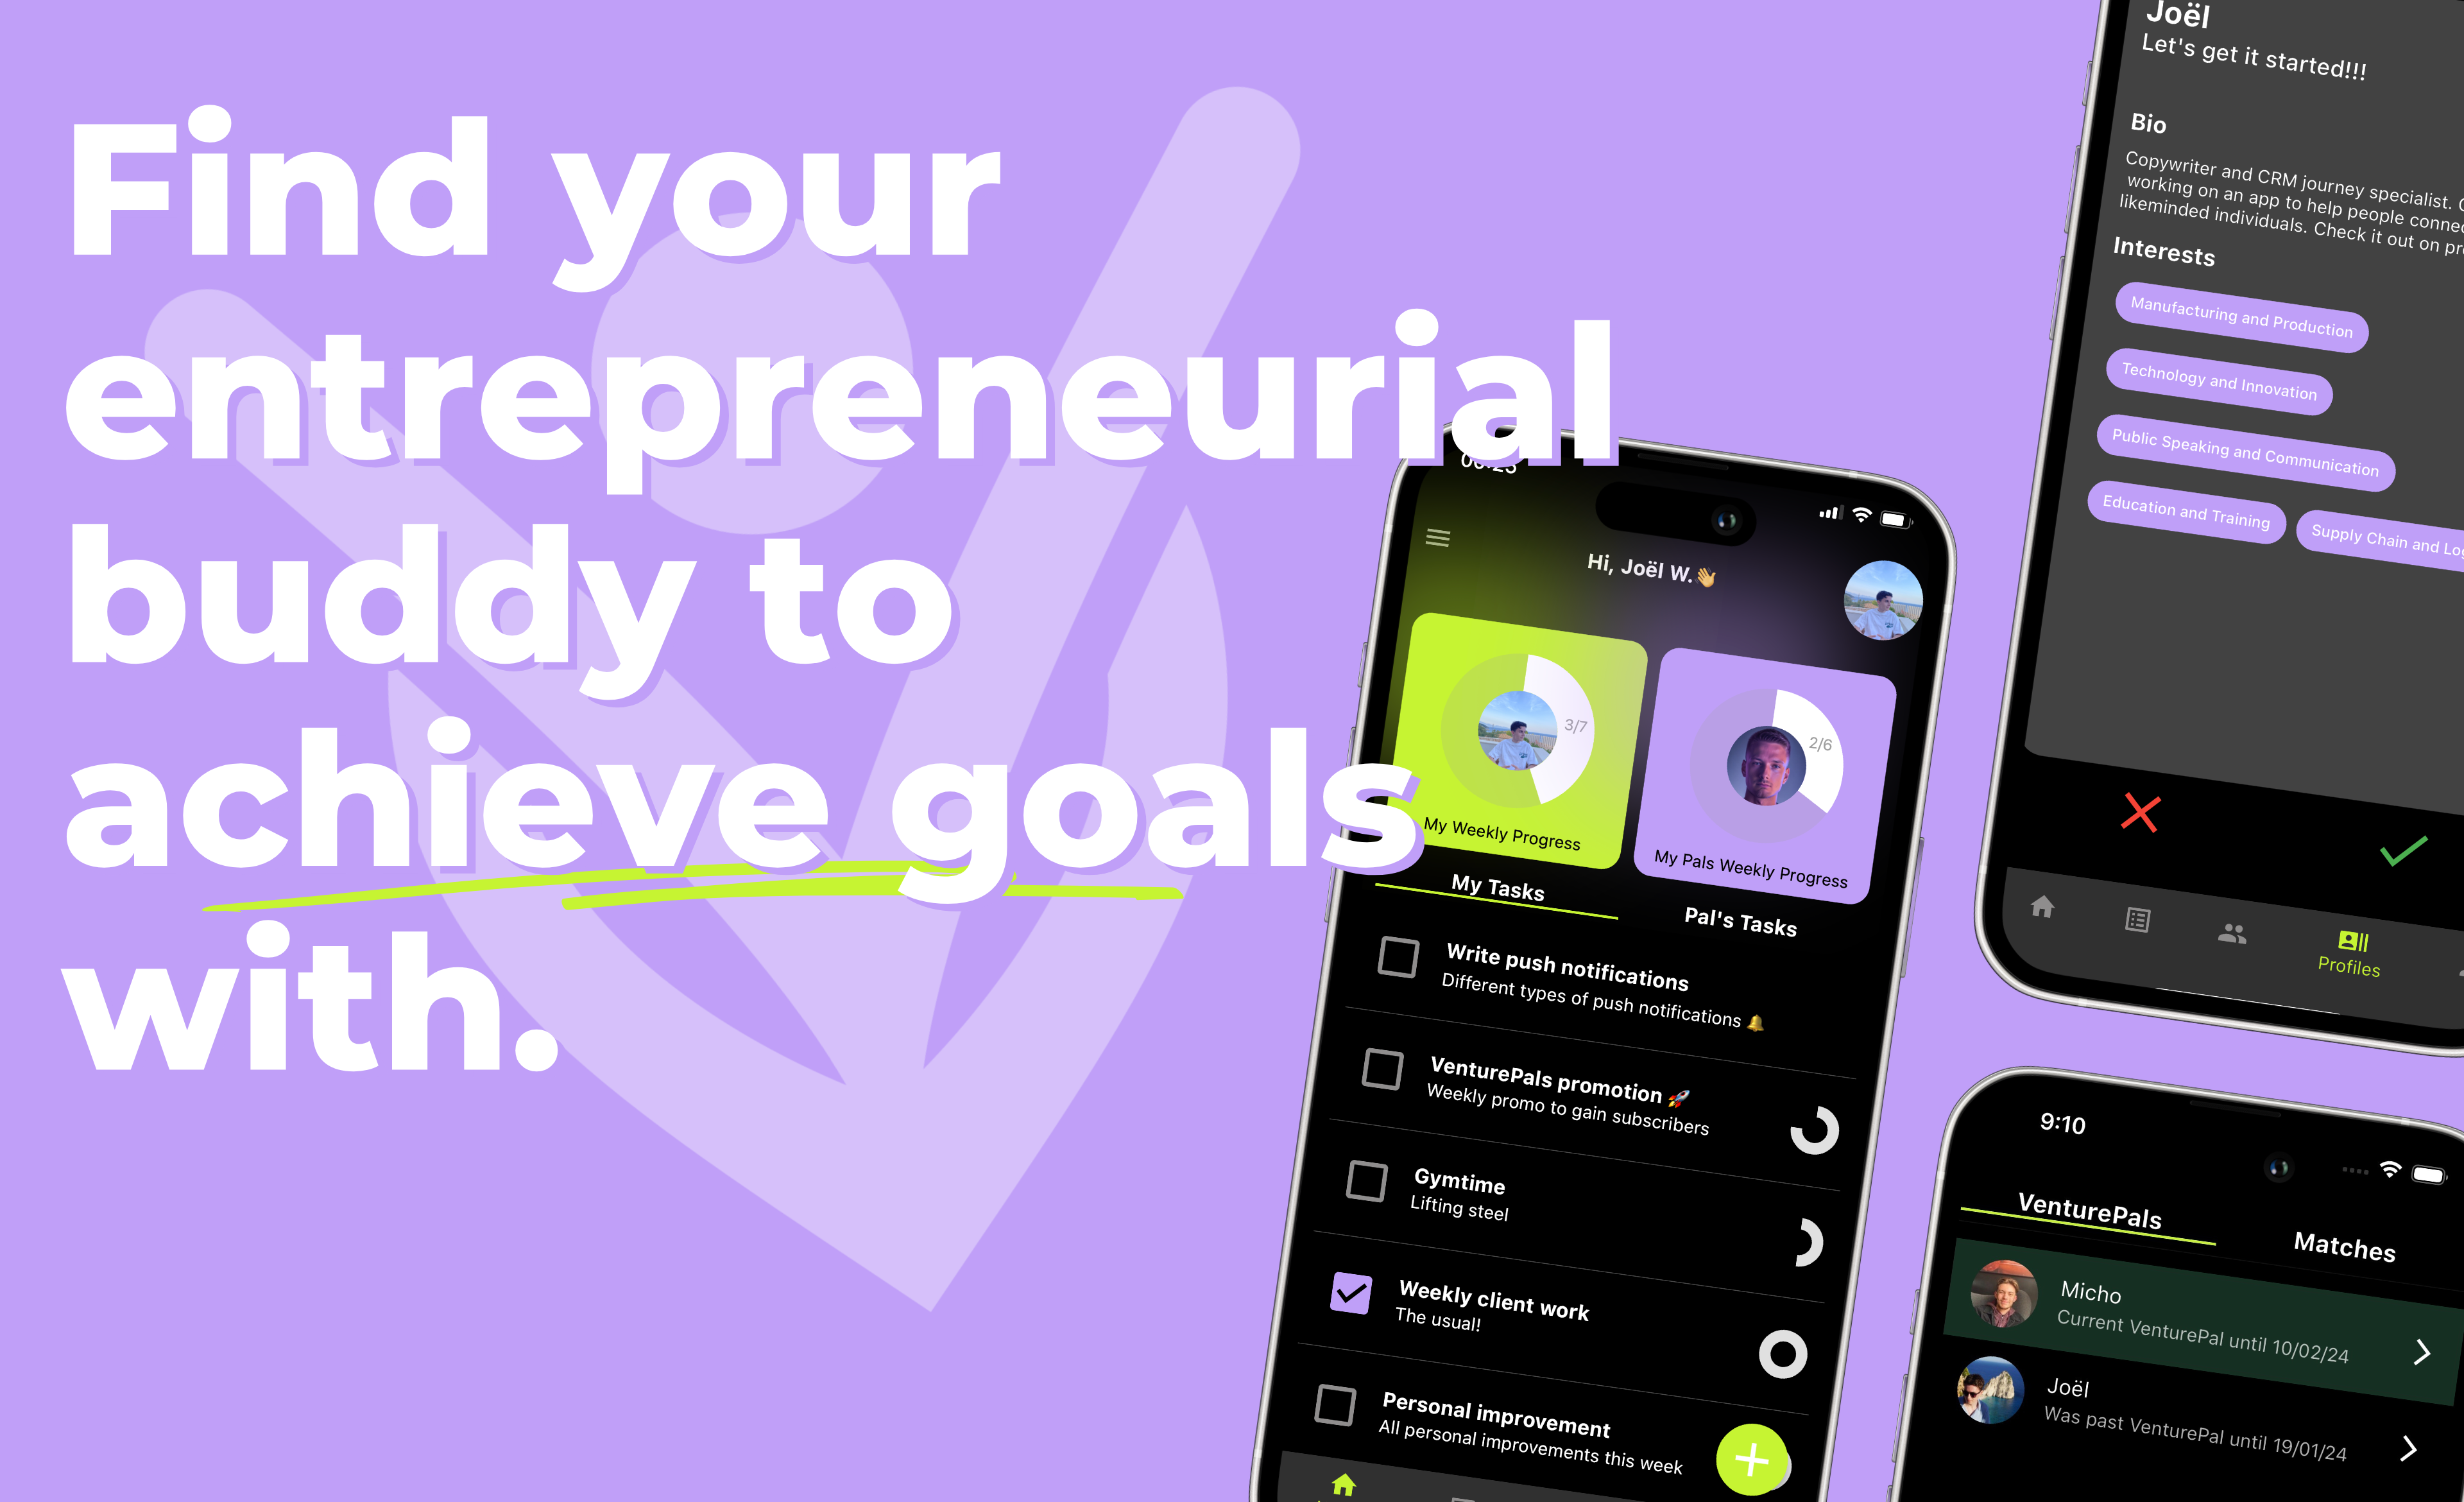 venturepals - Your entrepreneurial buddy to achieve goals with